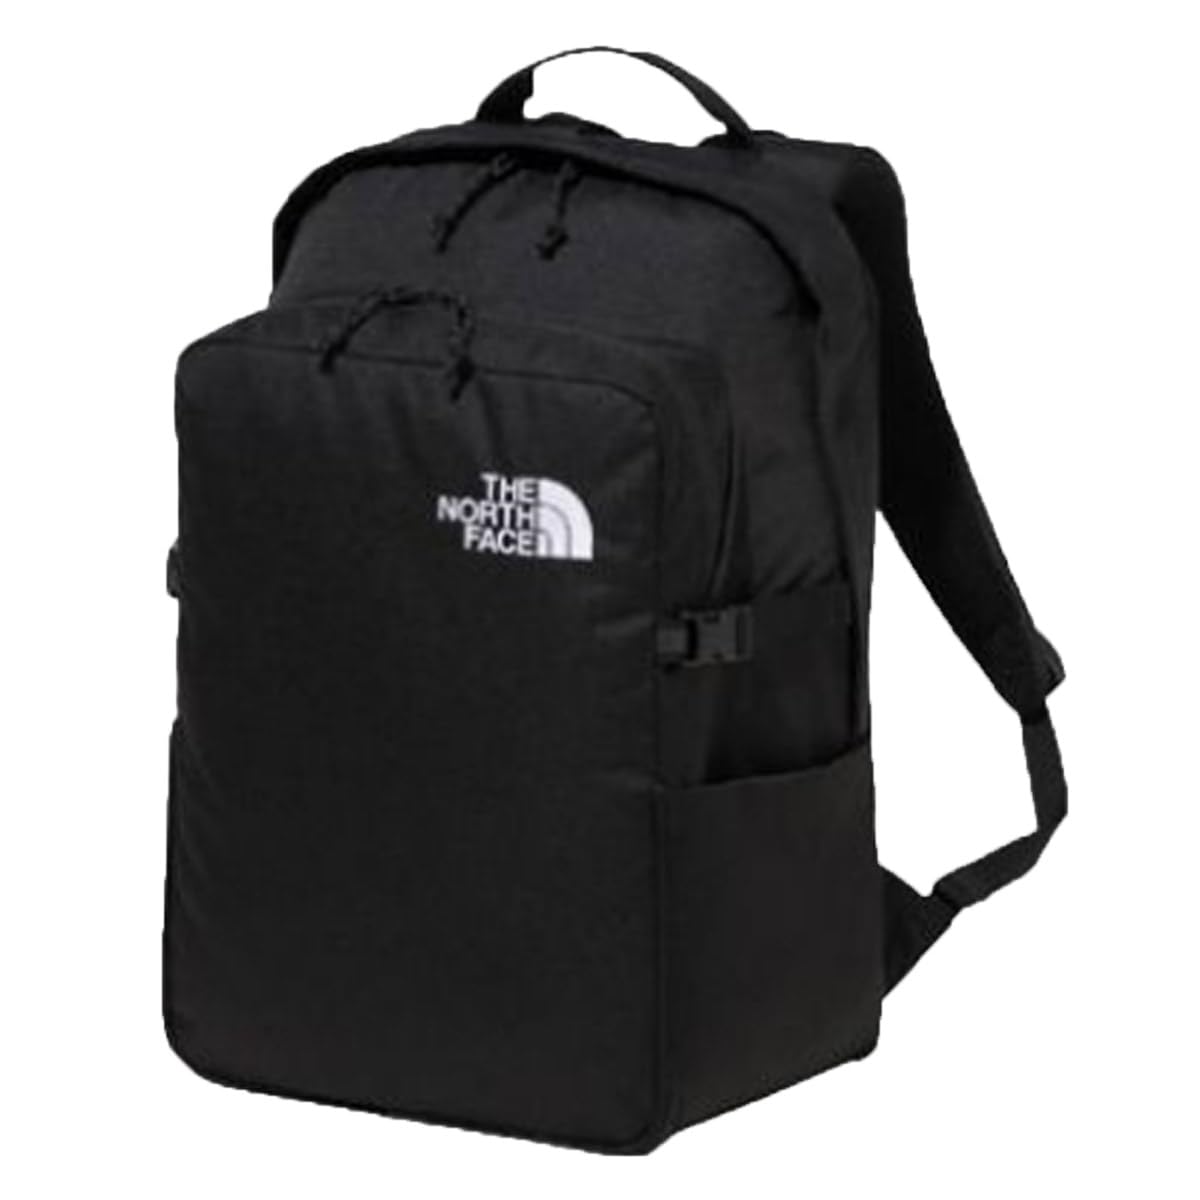 THE NORTH FACE(ザノースフェイス Backpack, Black, One Size